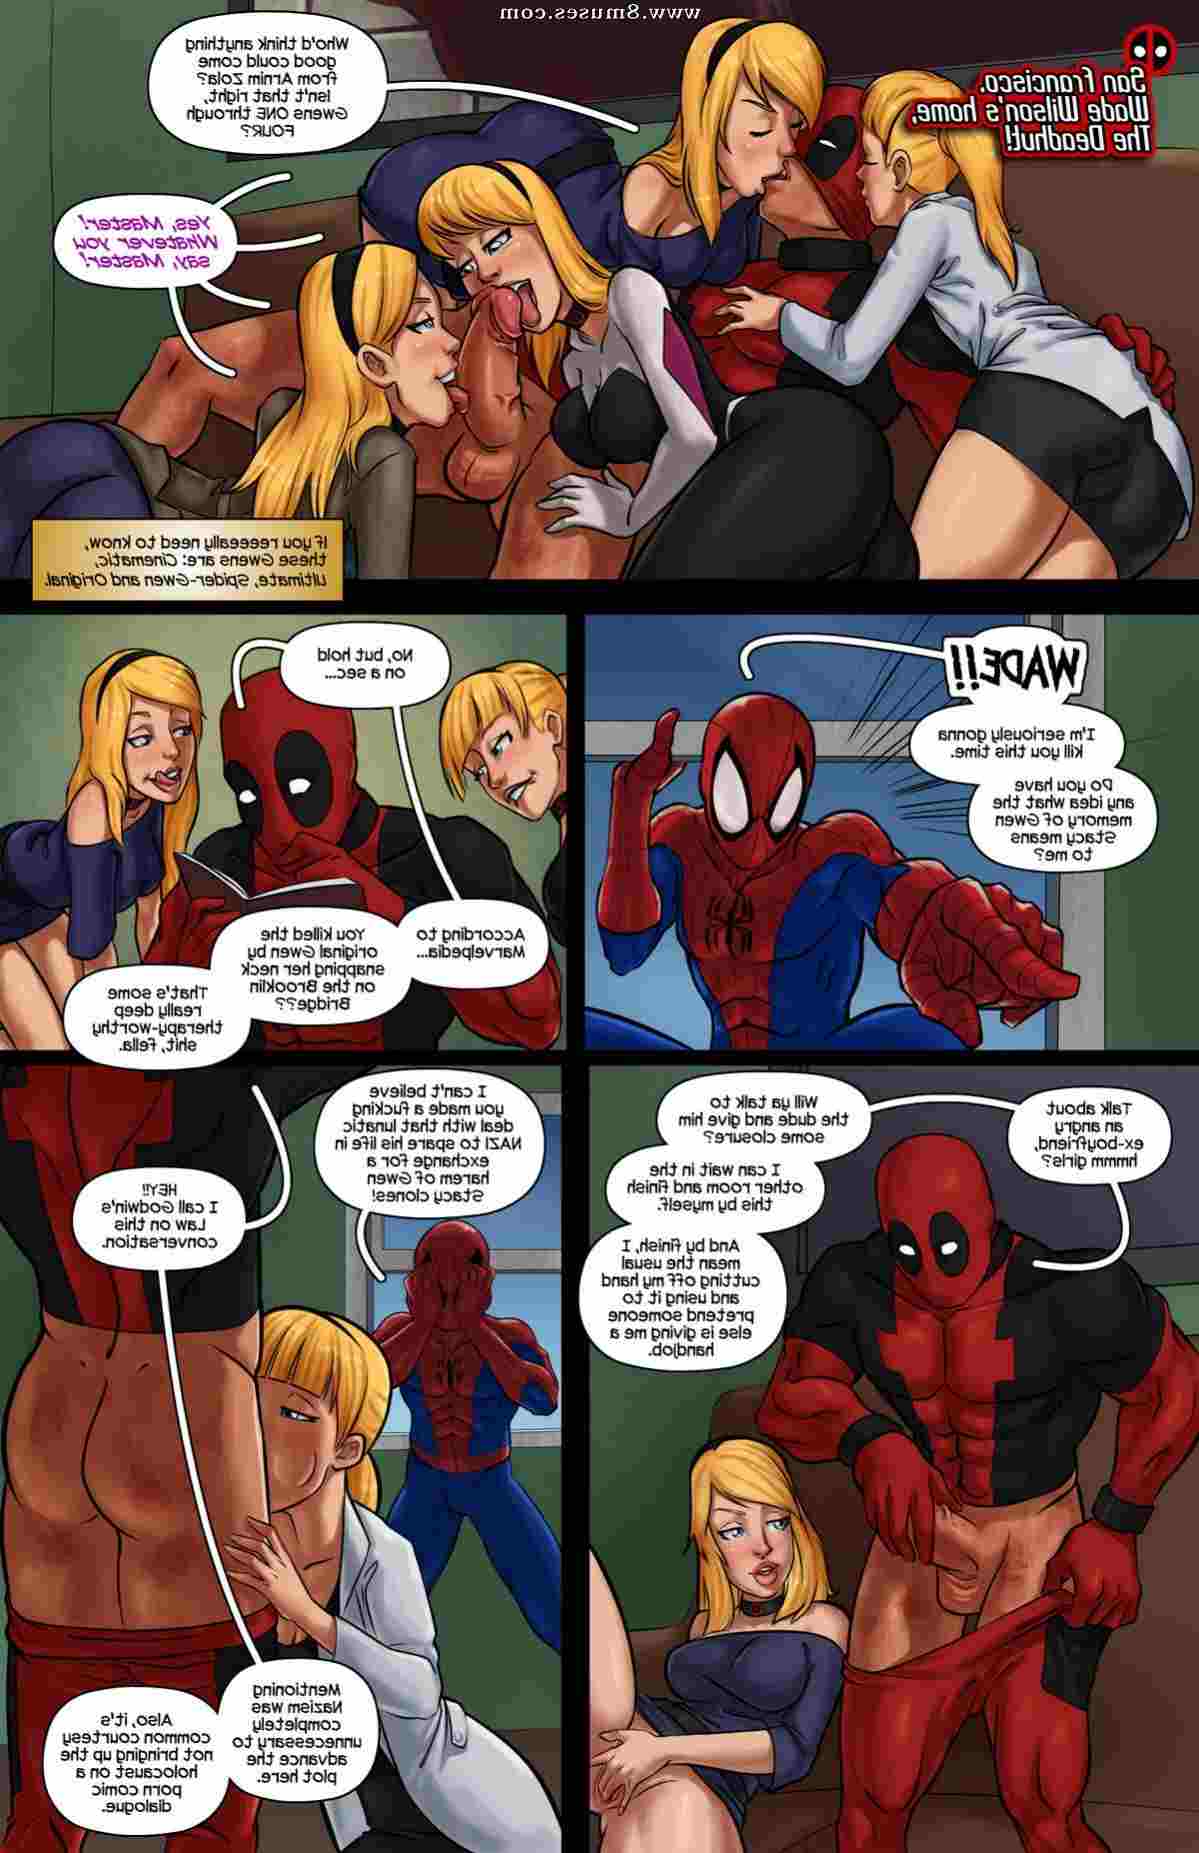 Tracy-Scops-Comics/Gwen-Stacies-are-the-sole-property-of-Deadpool Gwen_Stacies_are_the_sole_property_of_Deadpool__8muses_-_Sex_and_Porn_Comics_3.jpg